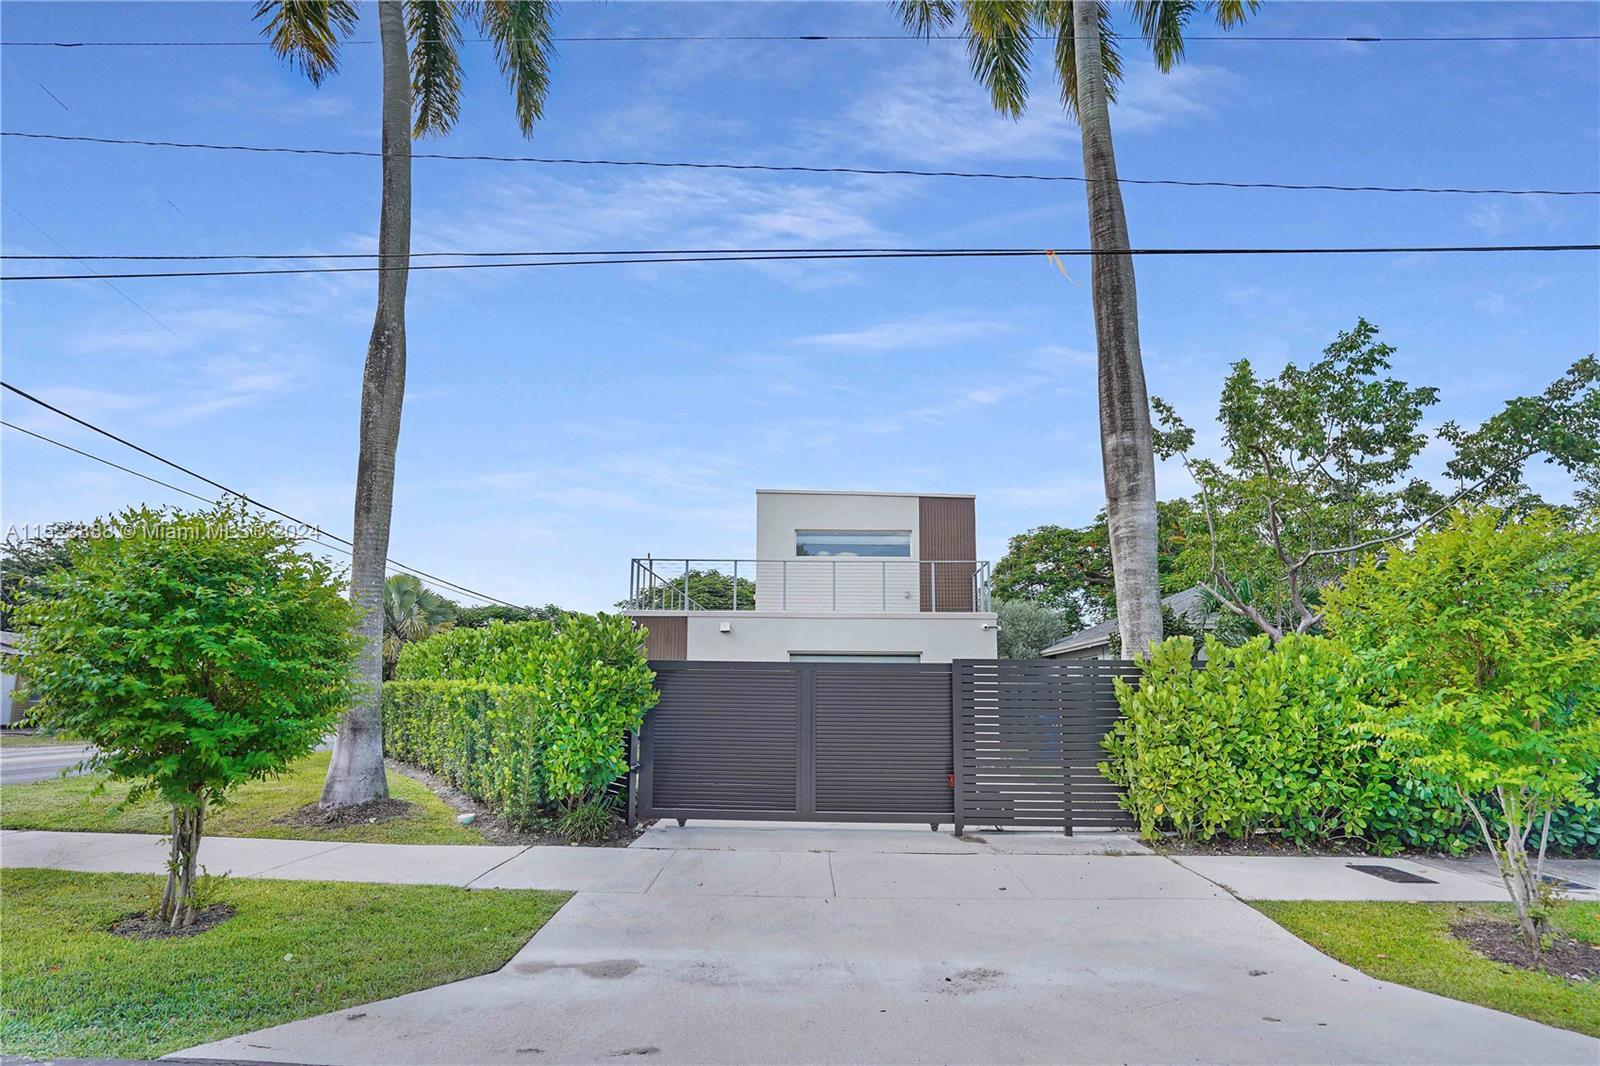 Photo of 1601 NW 6th Ave in Fort Lauderdale, FL